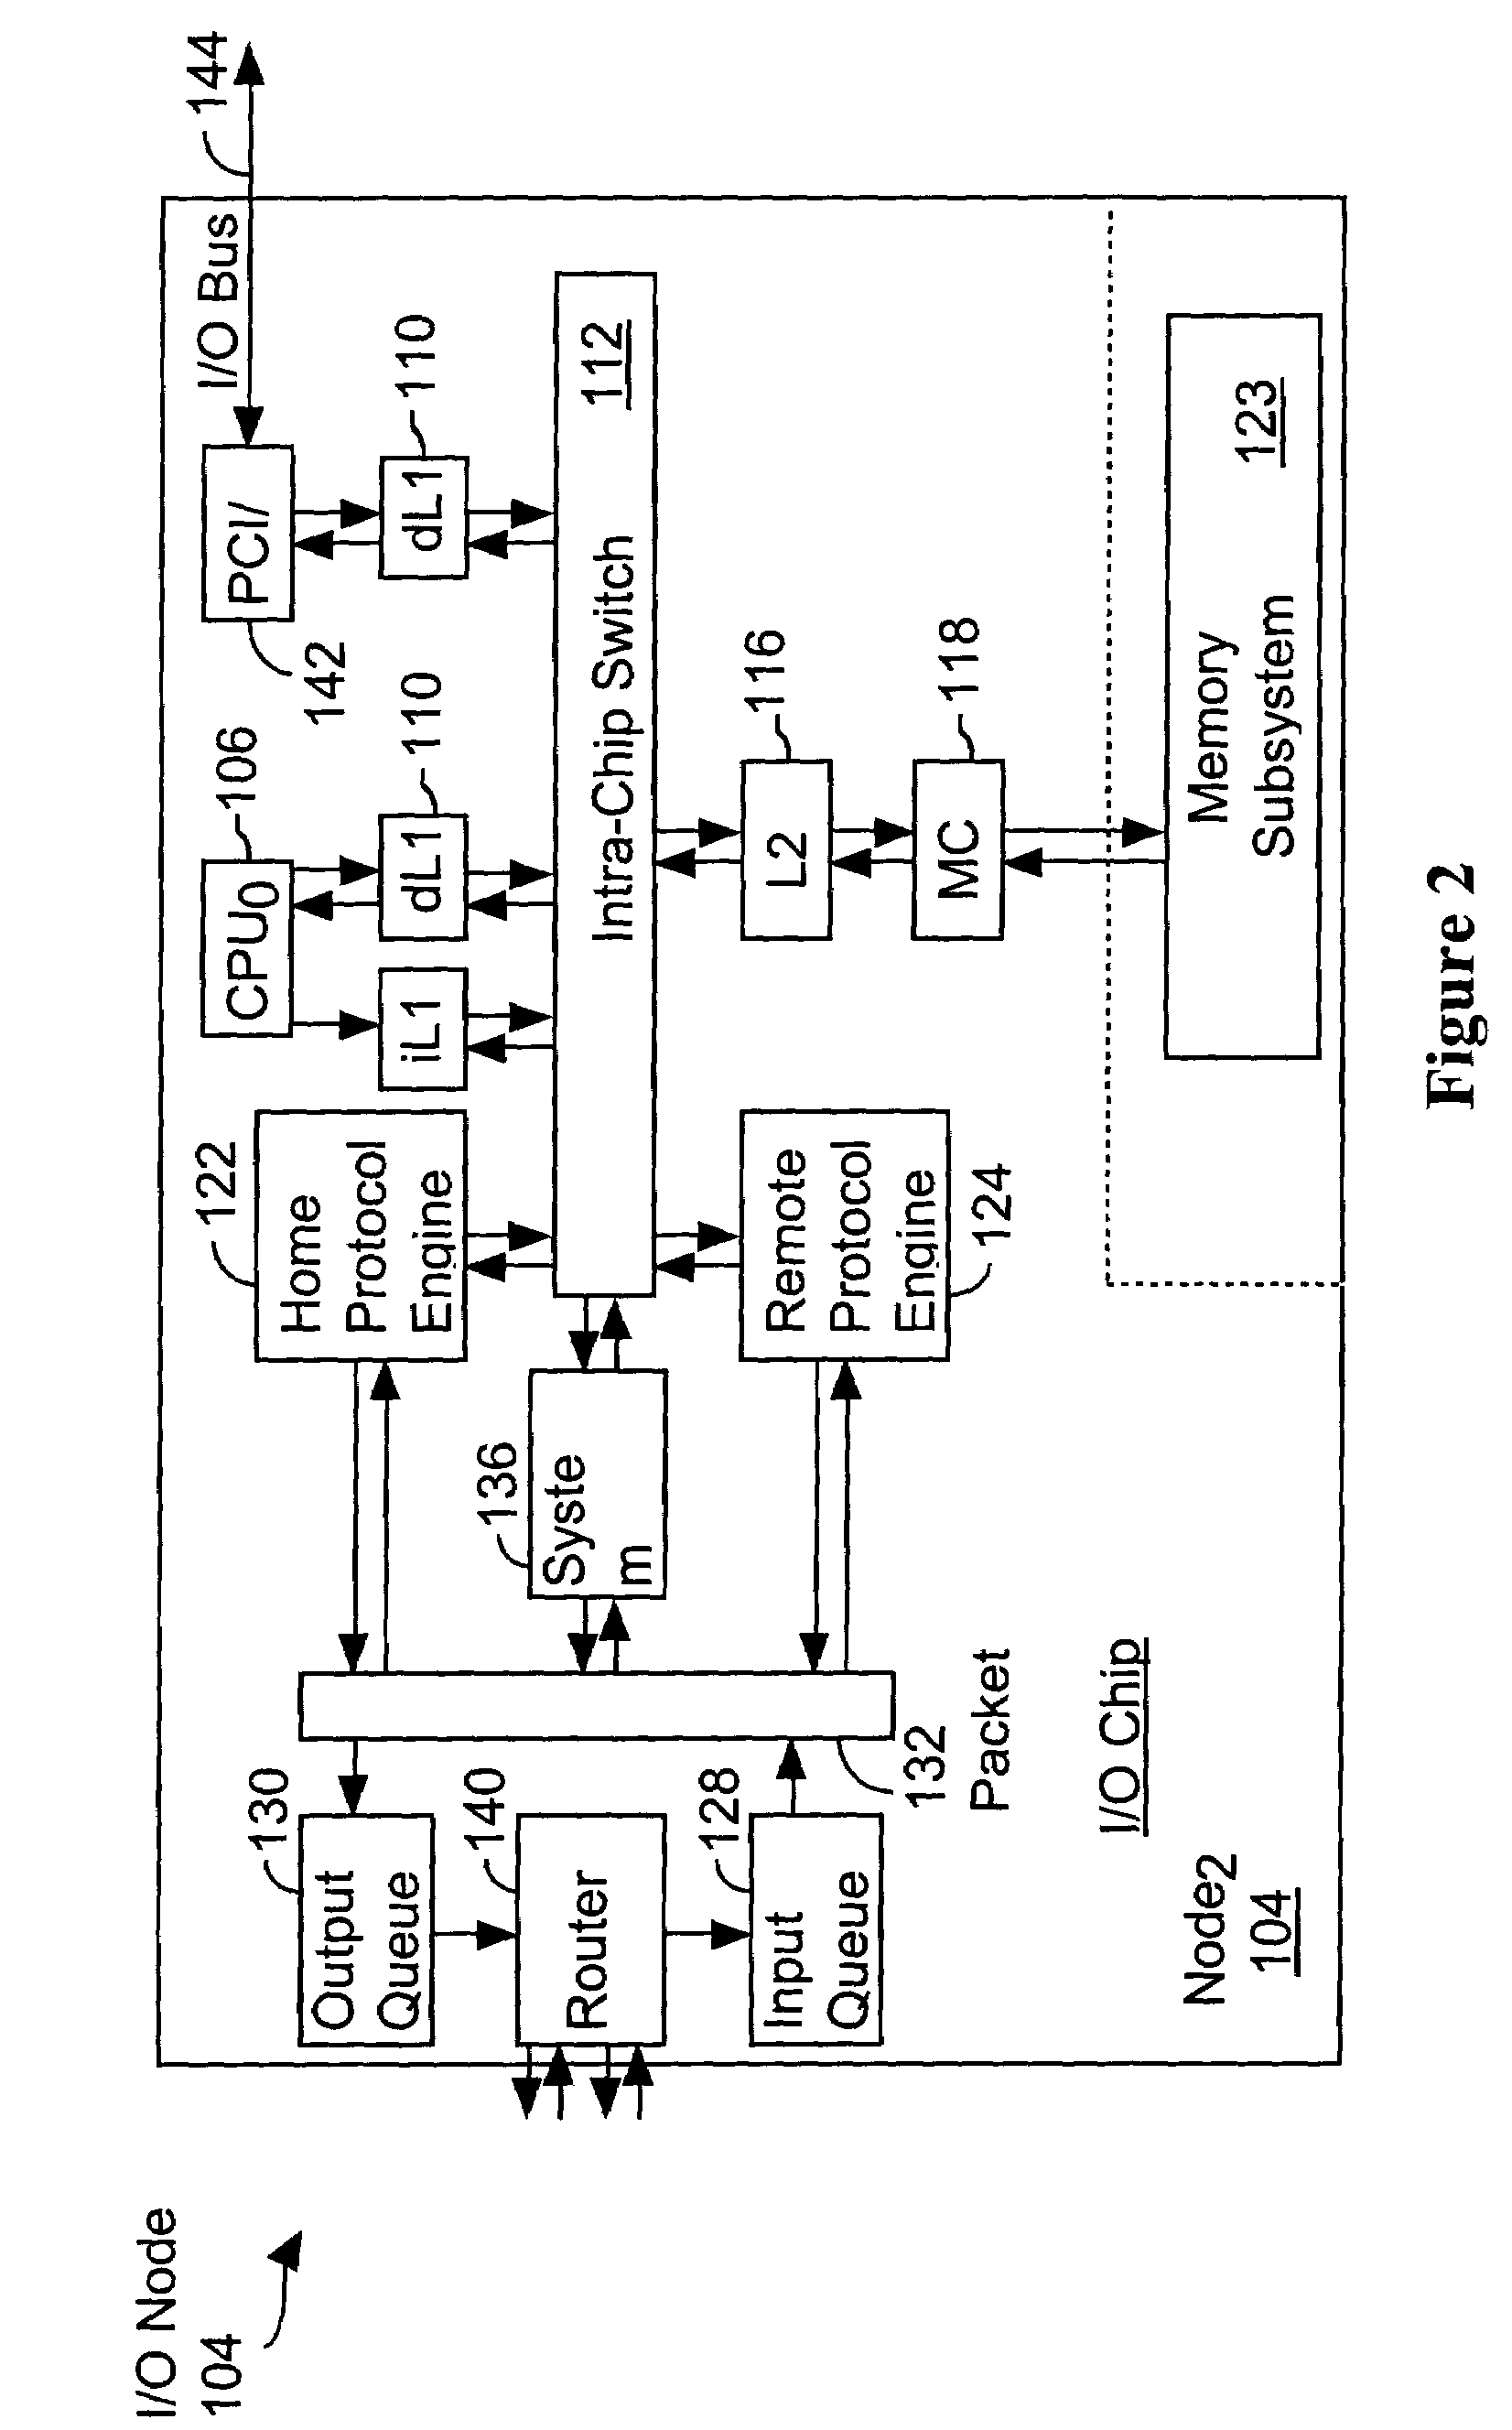 System and method for limited fanout daisy chaining of cache invalidation requests in a shared-memory multiprocessor system